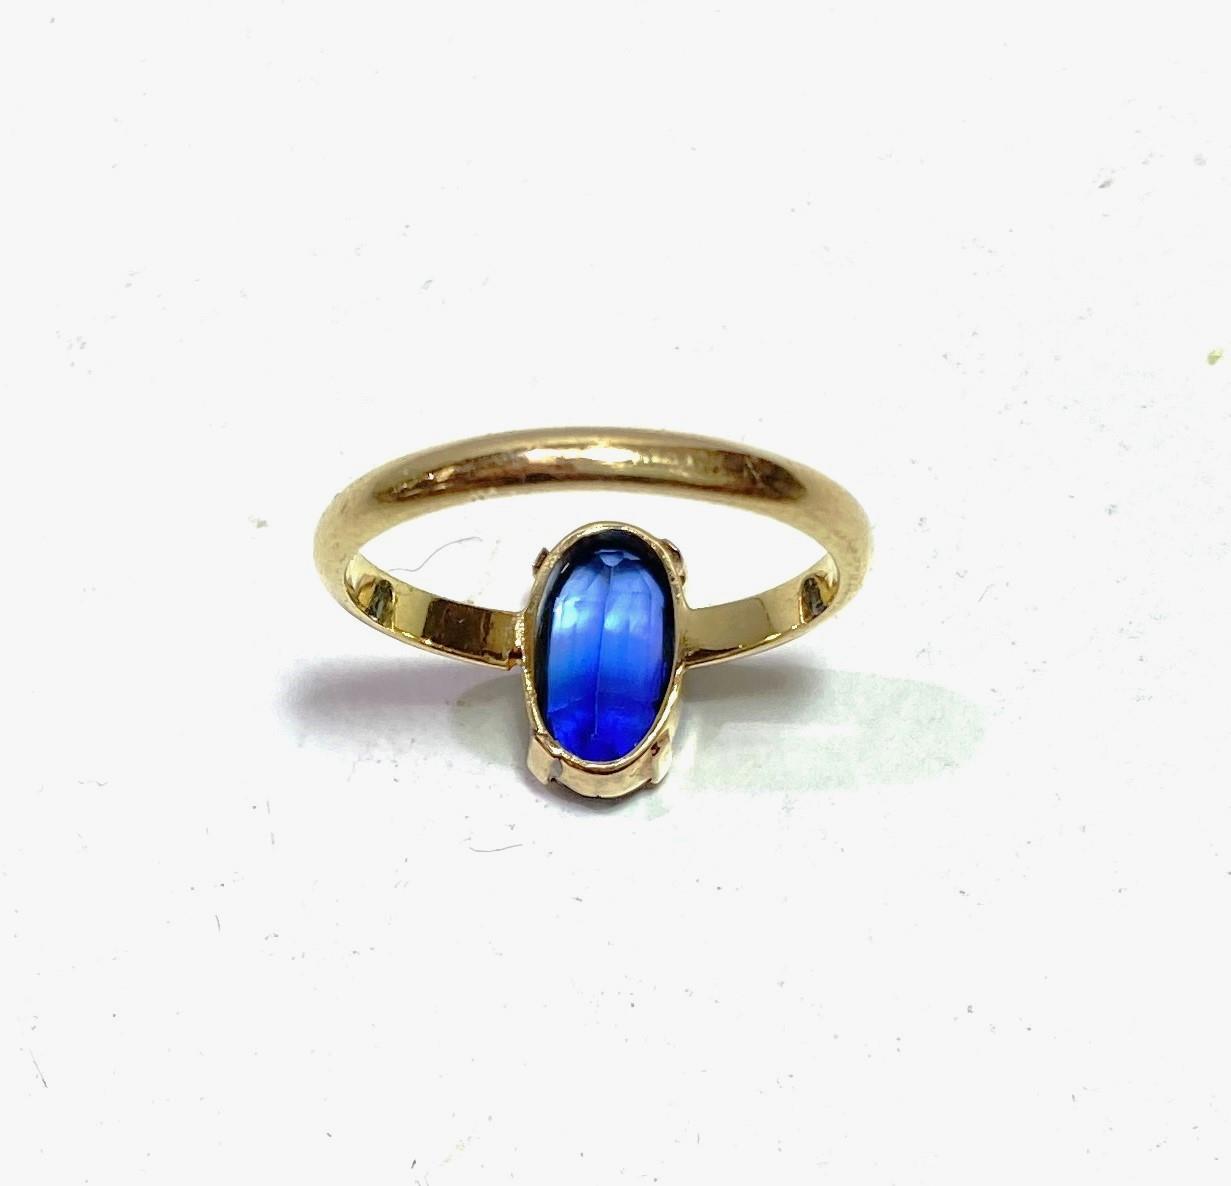 A lady's dress ring with elongated oval sapphire (11 x 6mm approx), in simple 4 claw setting, the - Image 3 of 3